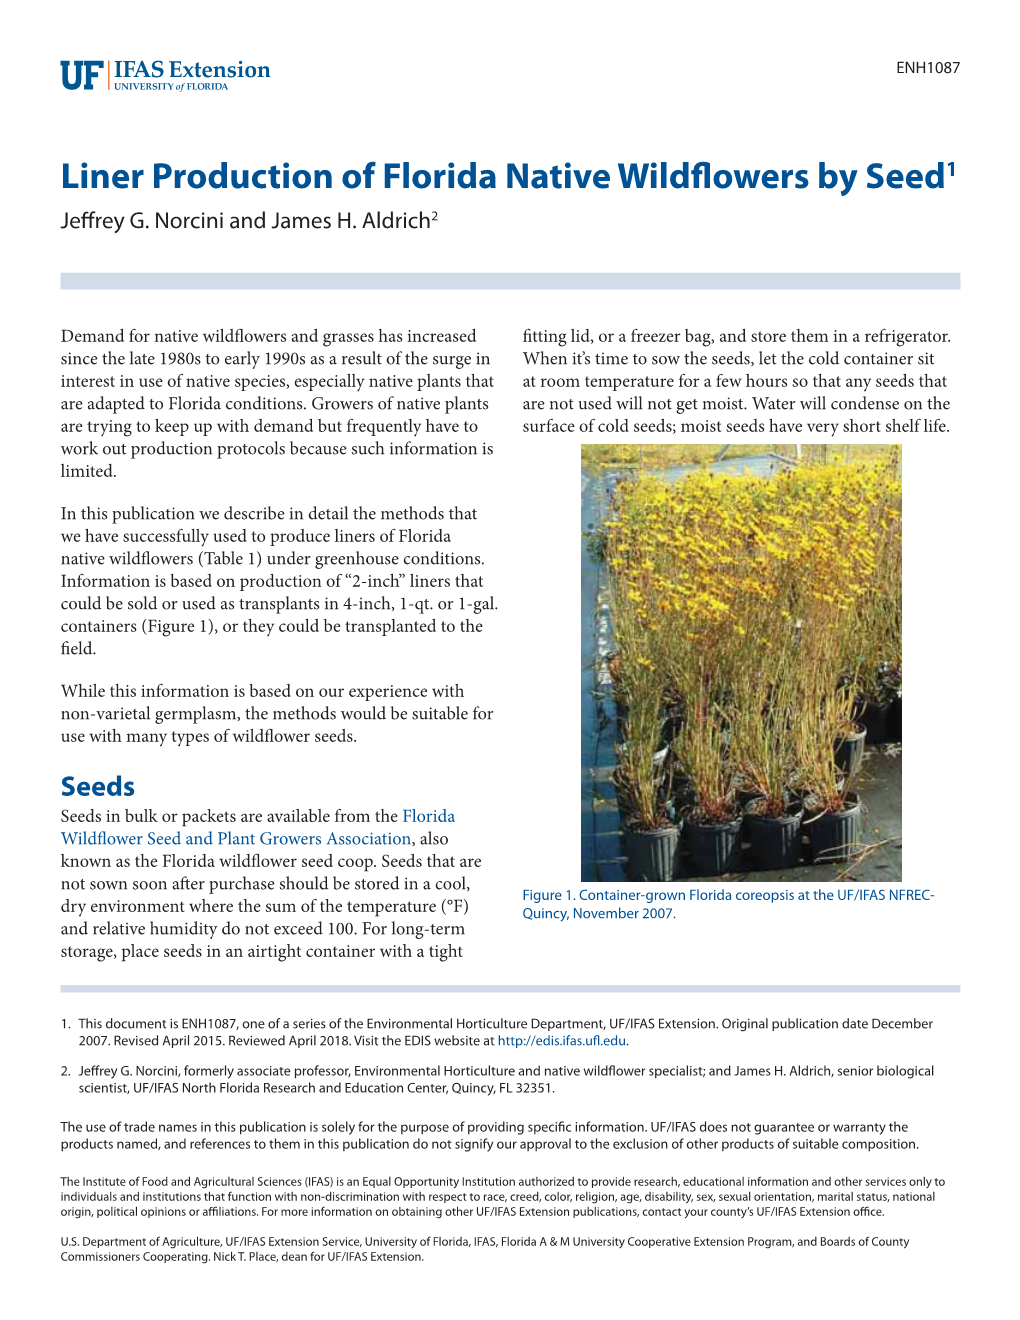 Liner Production of Florida Native Wildflowers by Seed1 Jeffrey G